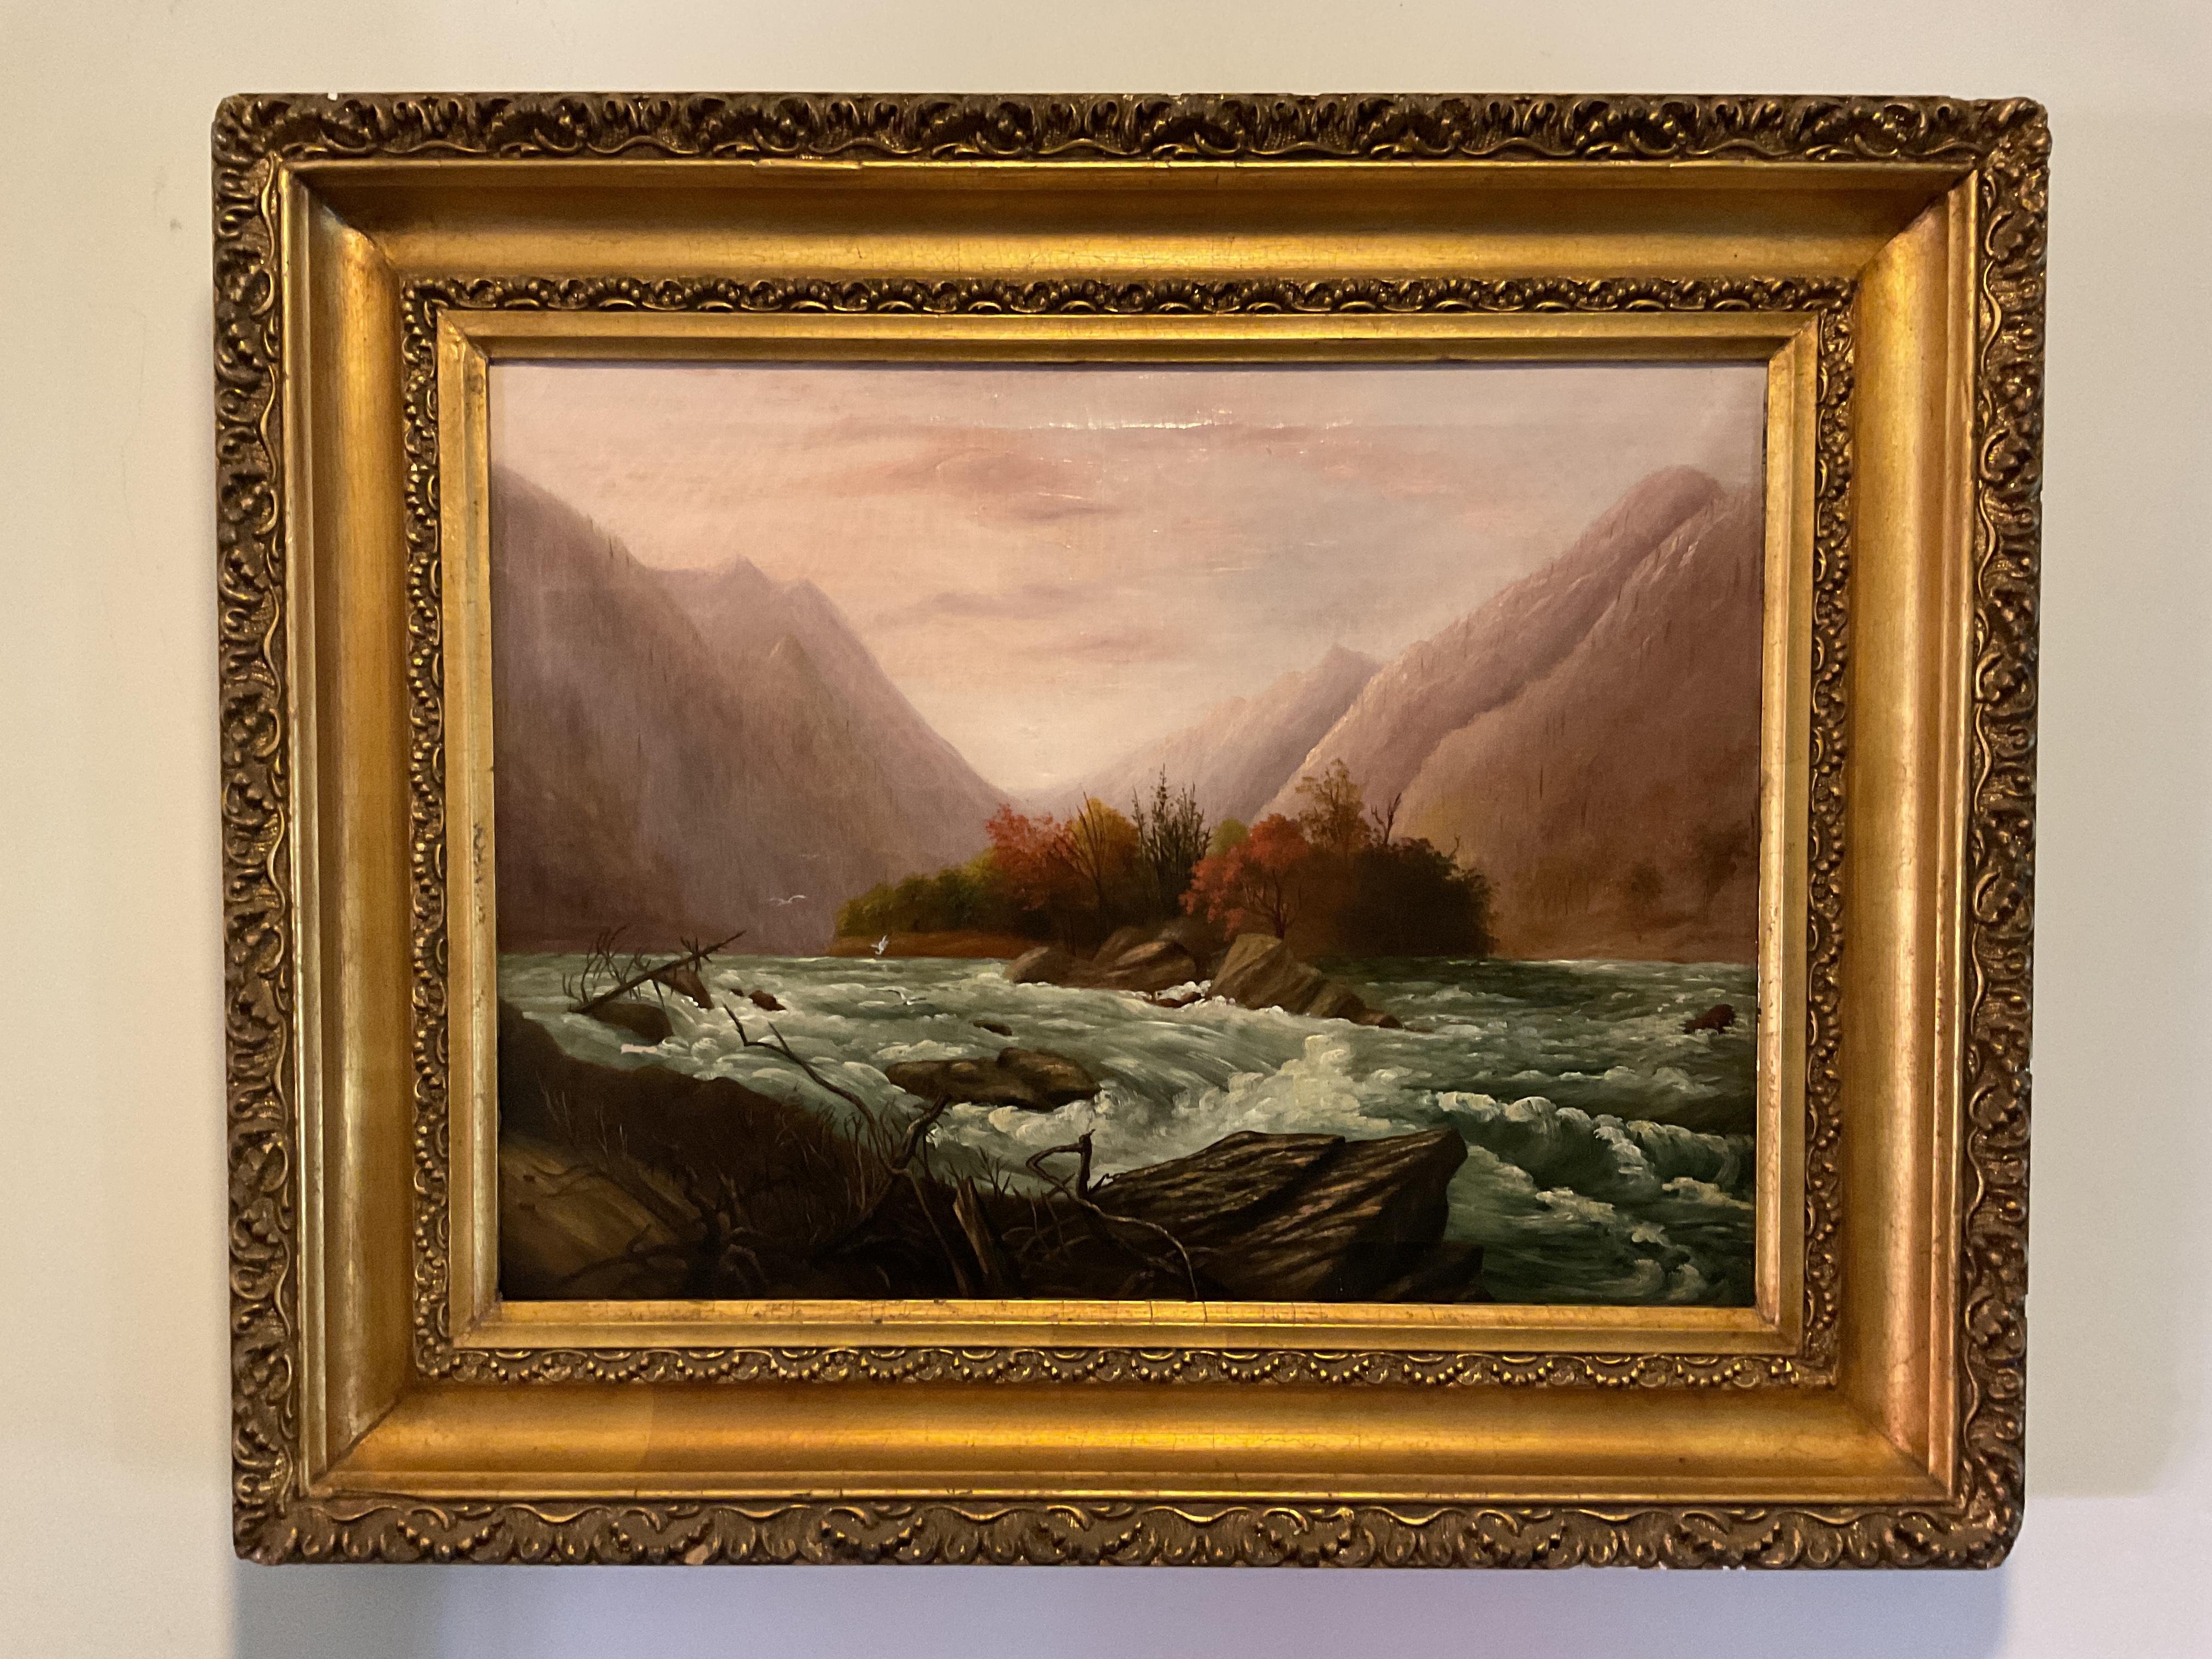 Unknown Landscape Painting - Rare Southern Painting of the French Broad River, North Carolina ca 1890